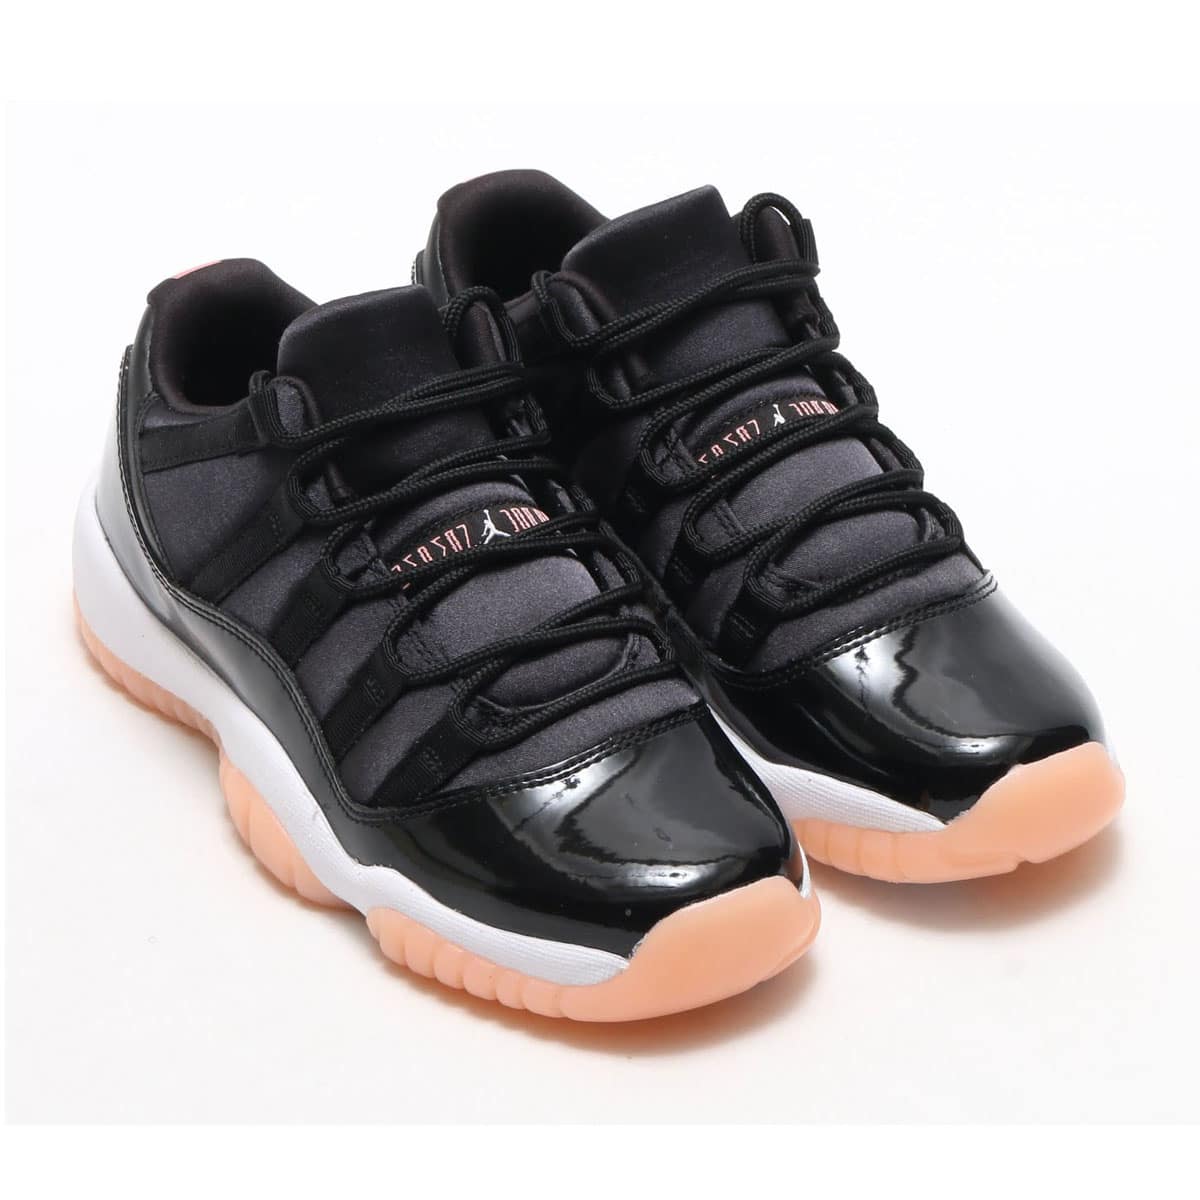 Air Jordan 11 Low Bleached Coral Black Youth 580521-013 Lot Size